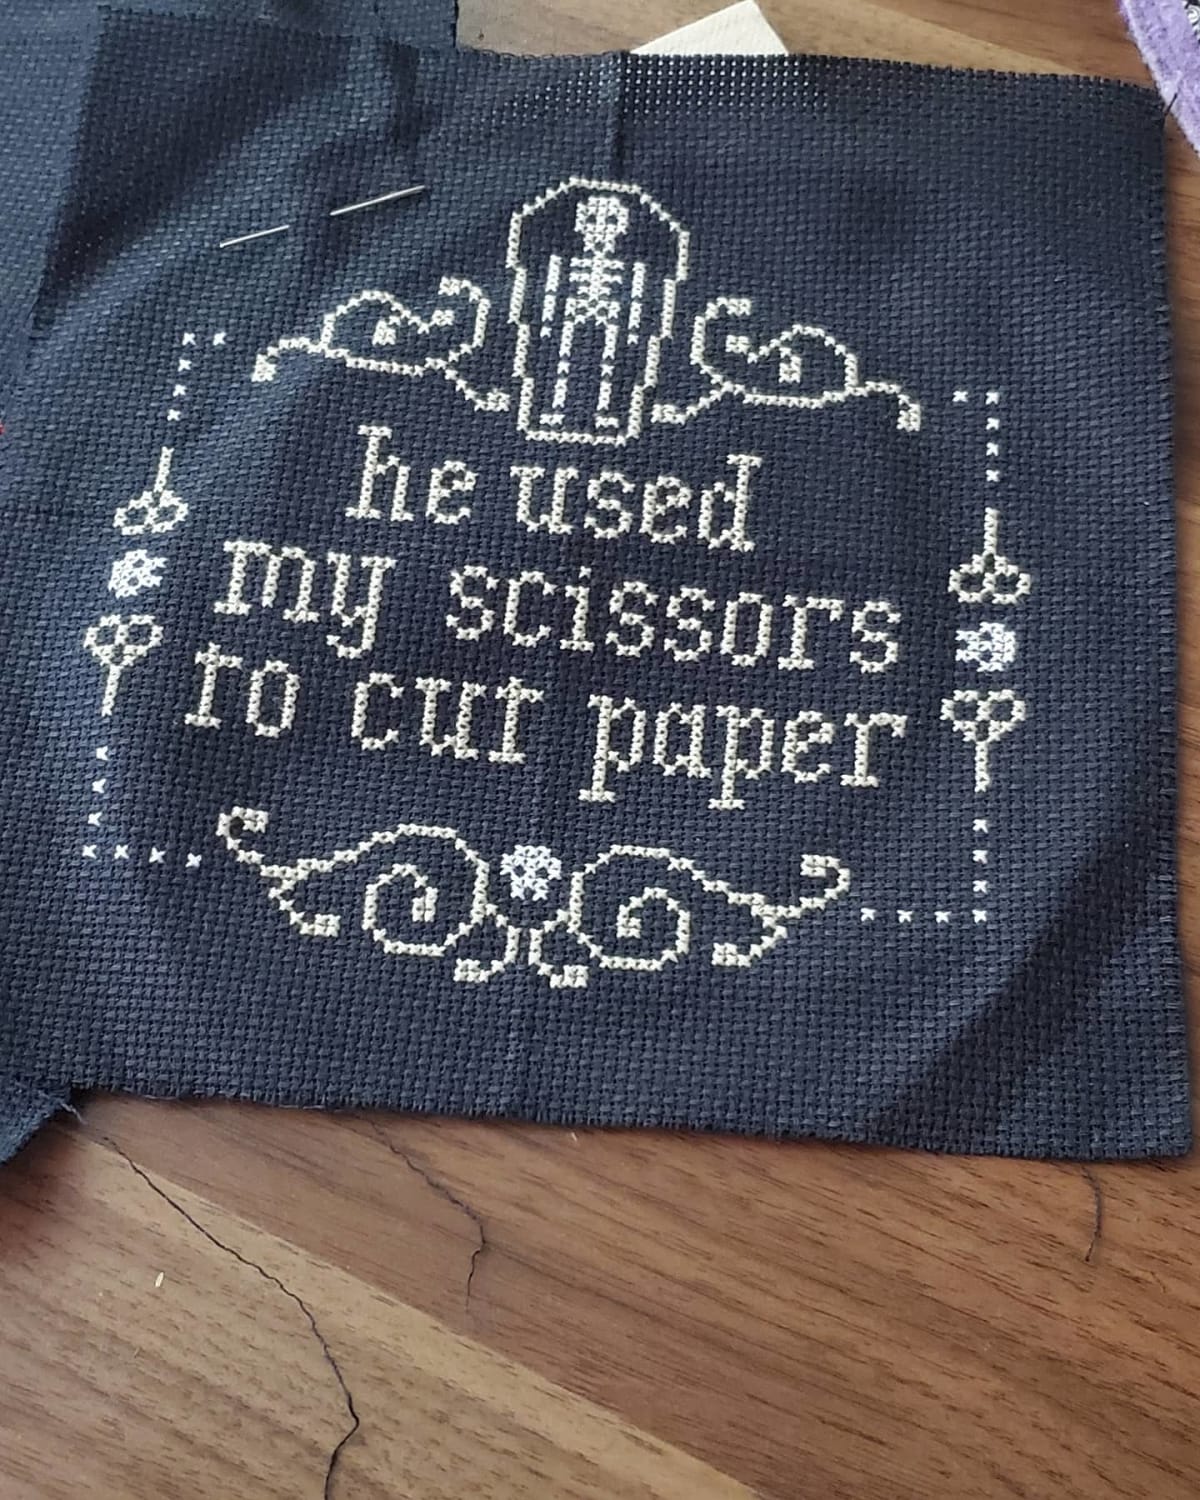 [FO] I'm first and foremost an amateur seamstress - have been interested in making clothes and such since age 3. So obviously this one needed to be stitched to adorn my craft room. Any other garment sewers about?